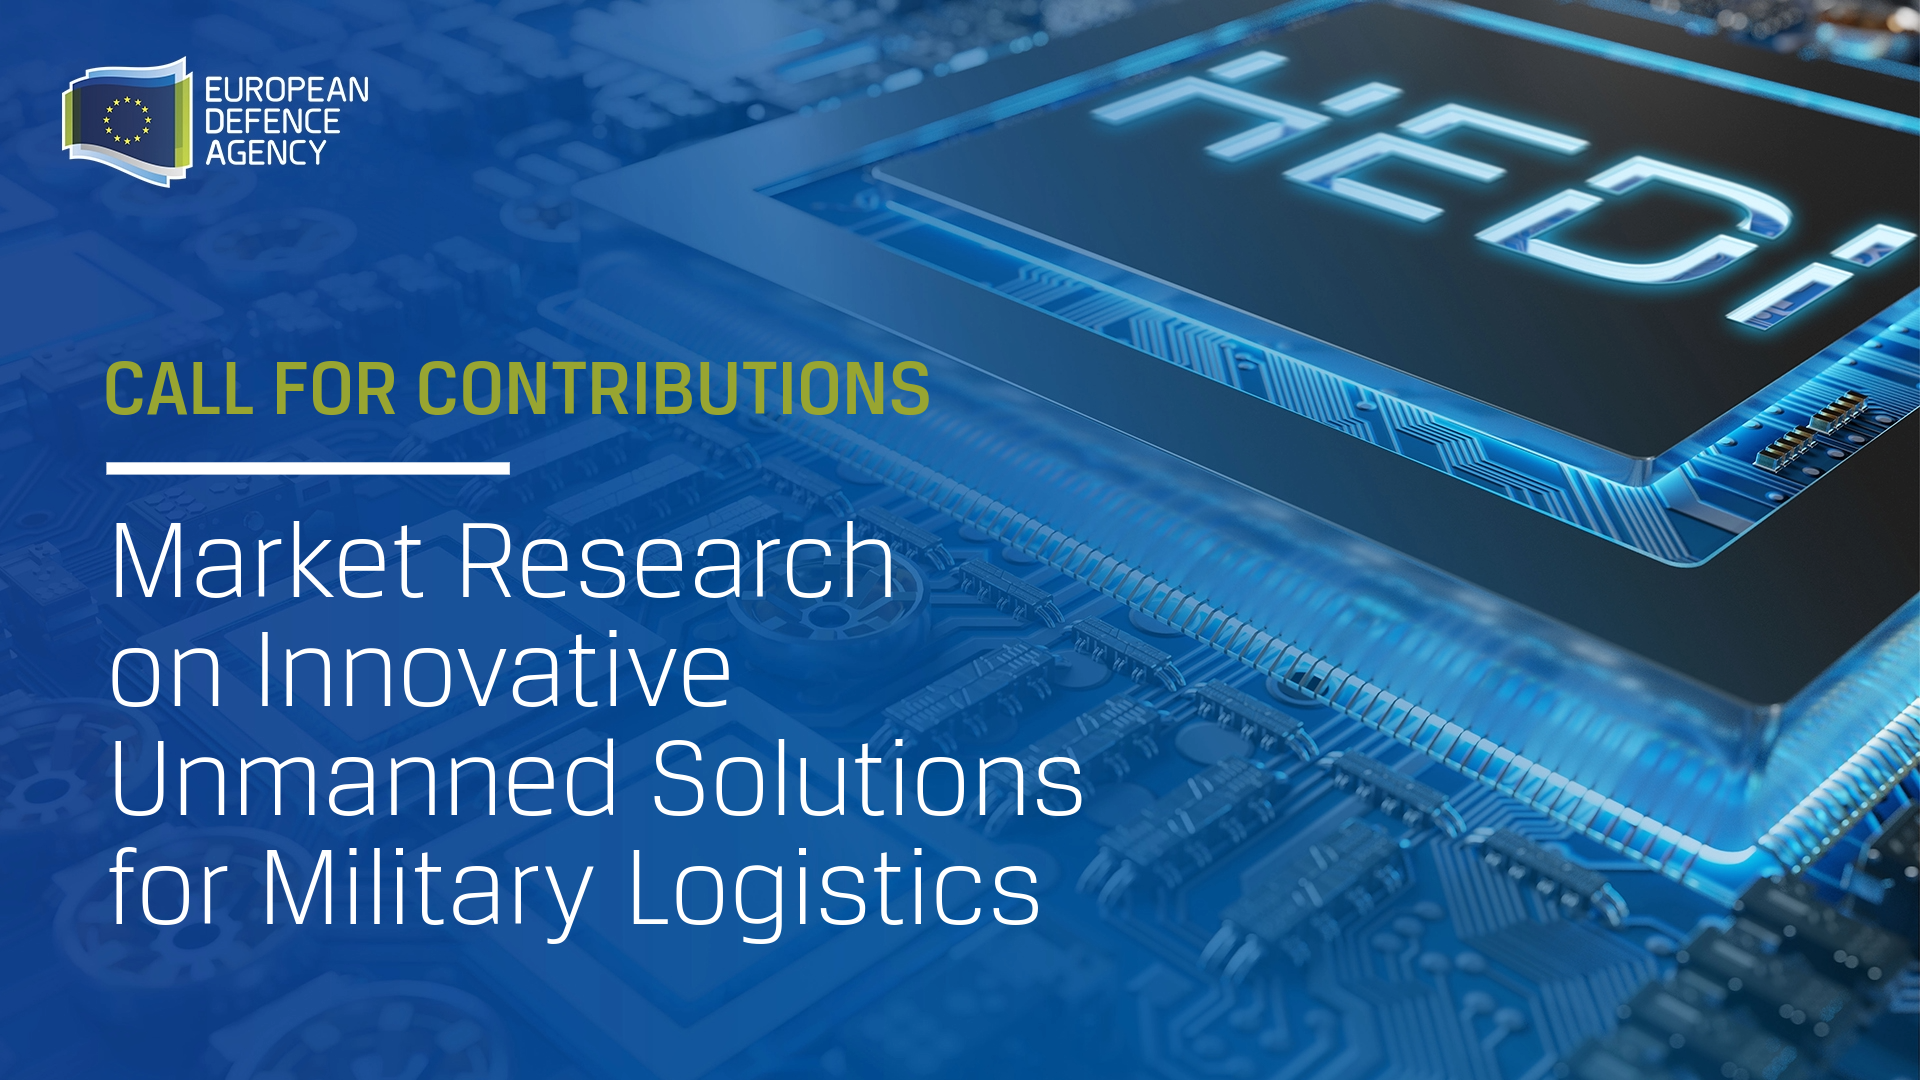 Call for contributions: Market Research on Innovative Unmanned Solutions for Military Logistics